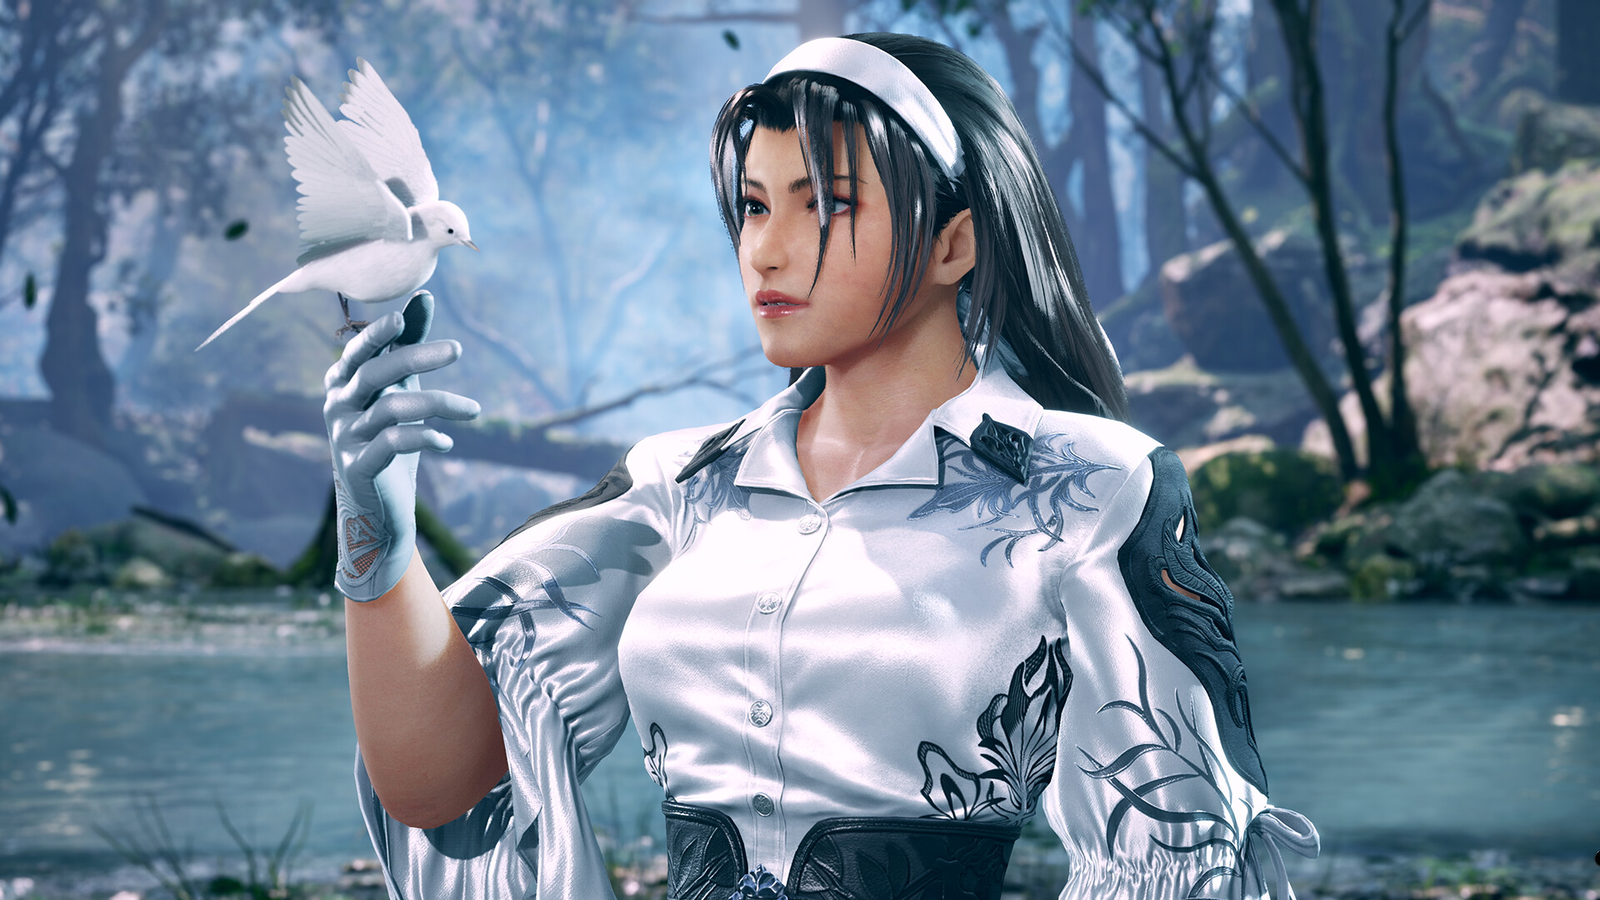 Tekken 8 PC requirements pack a punch, requires 100 GB available